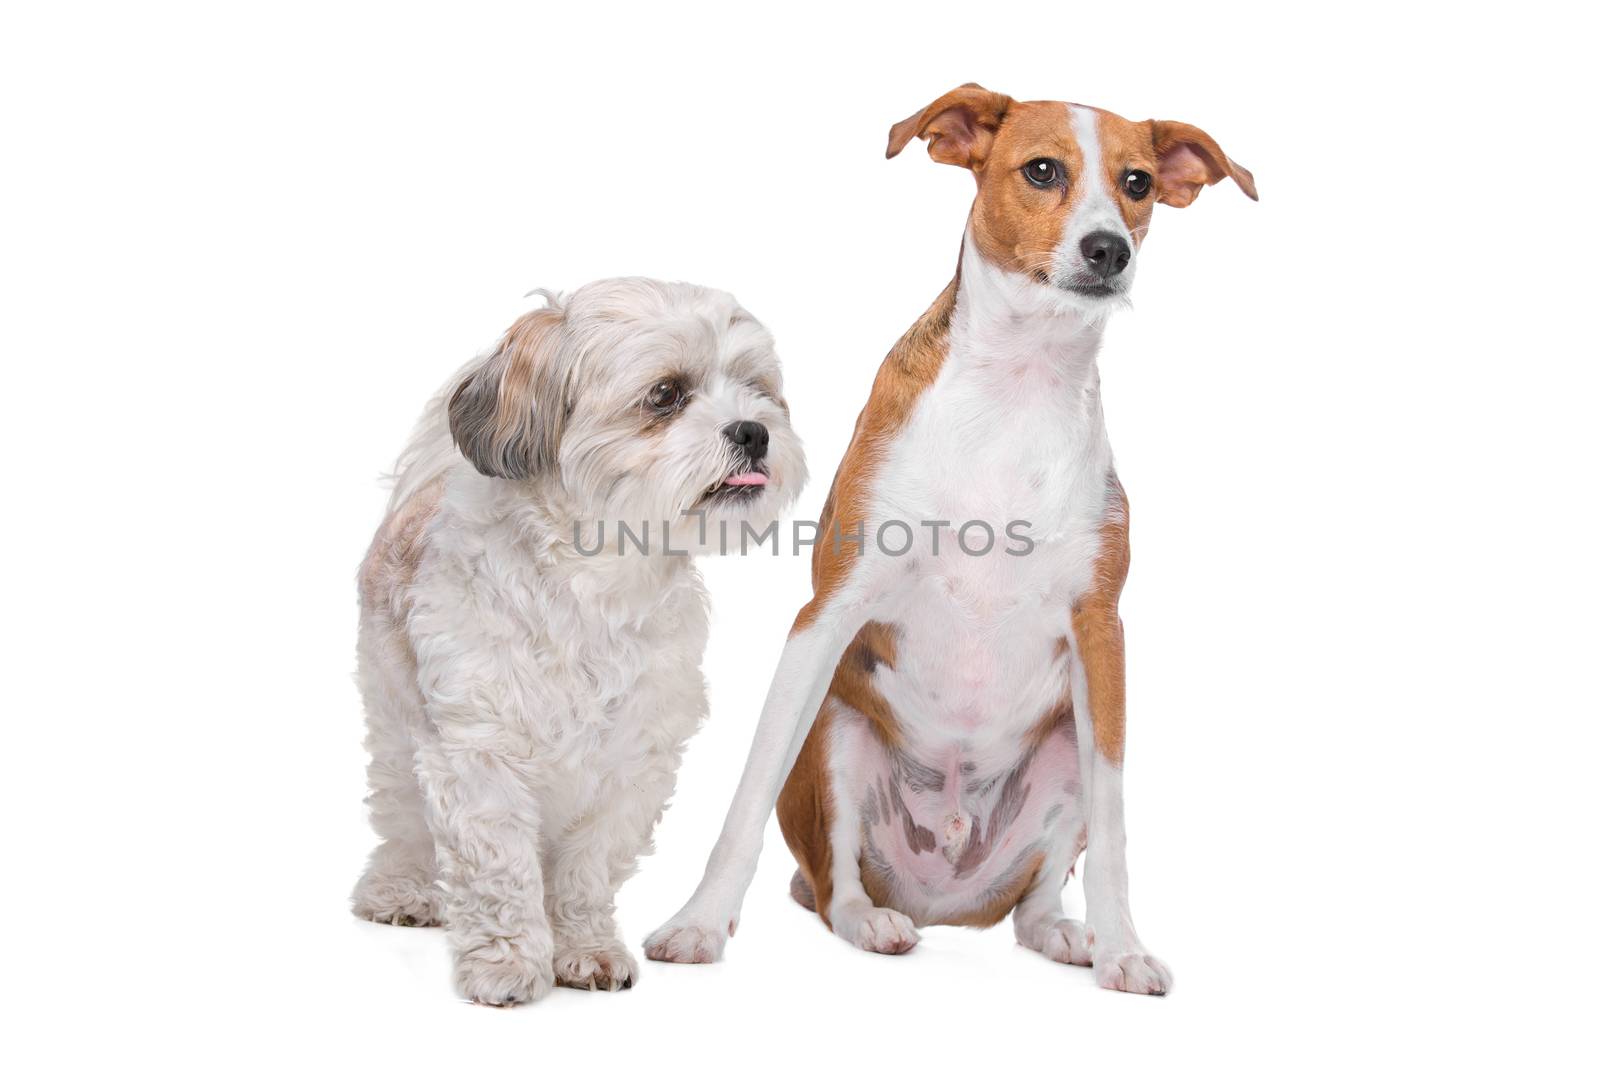 mix shih tzu and maltese and a mix podenco dog in front of a white background